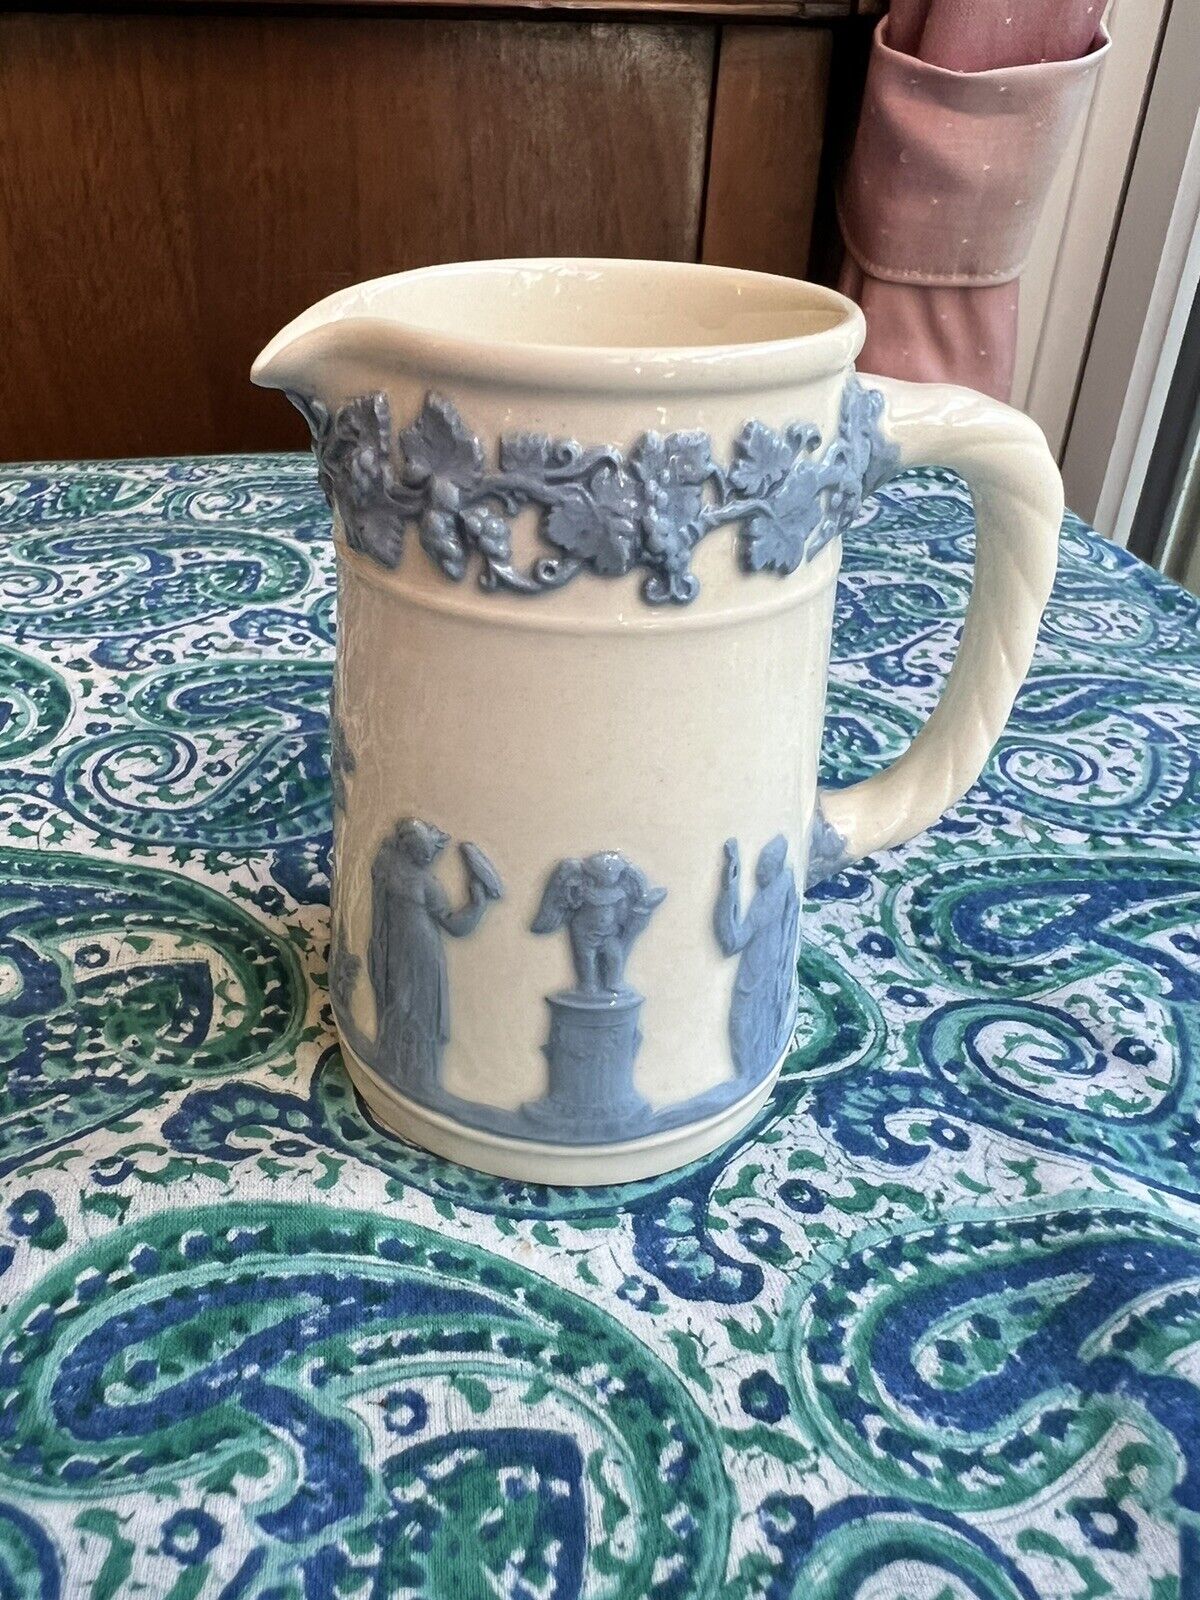 Vintage Wedgwood Embossed Queens Ware Pitcher Blue on White